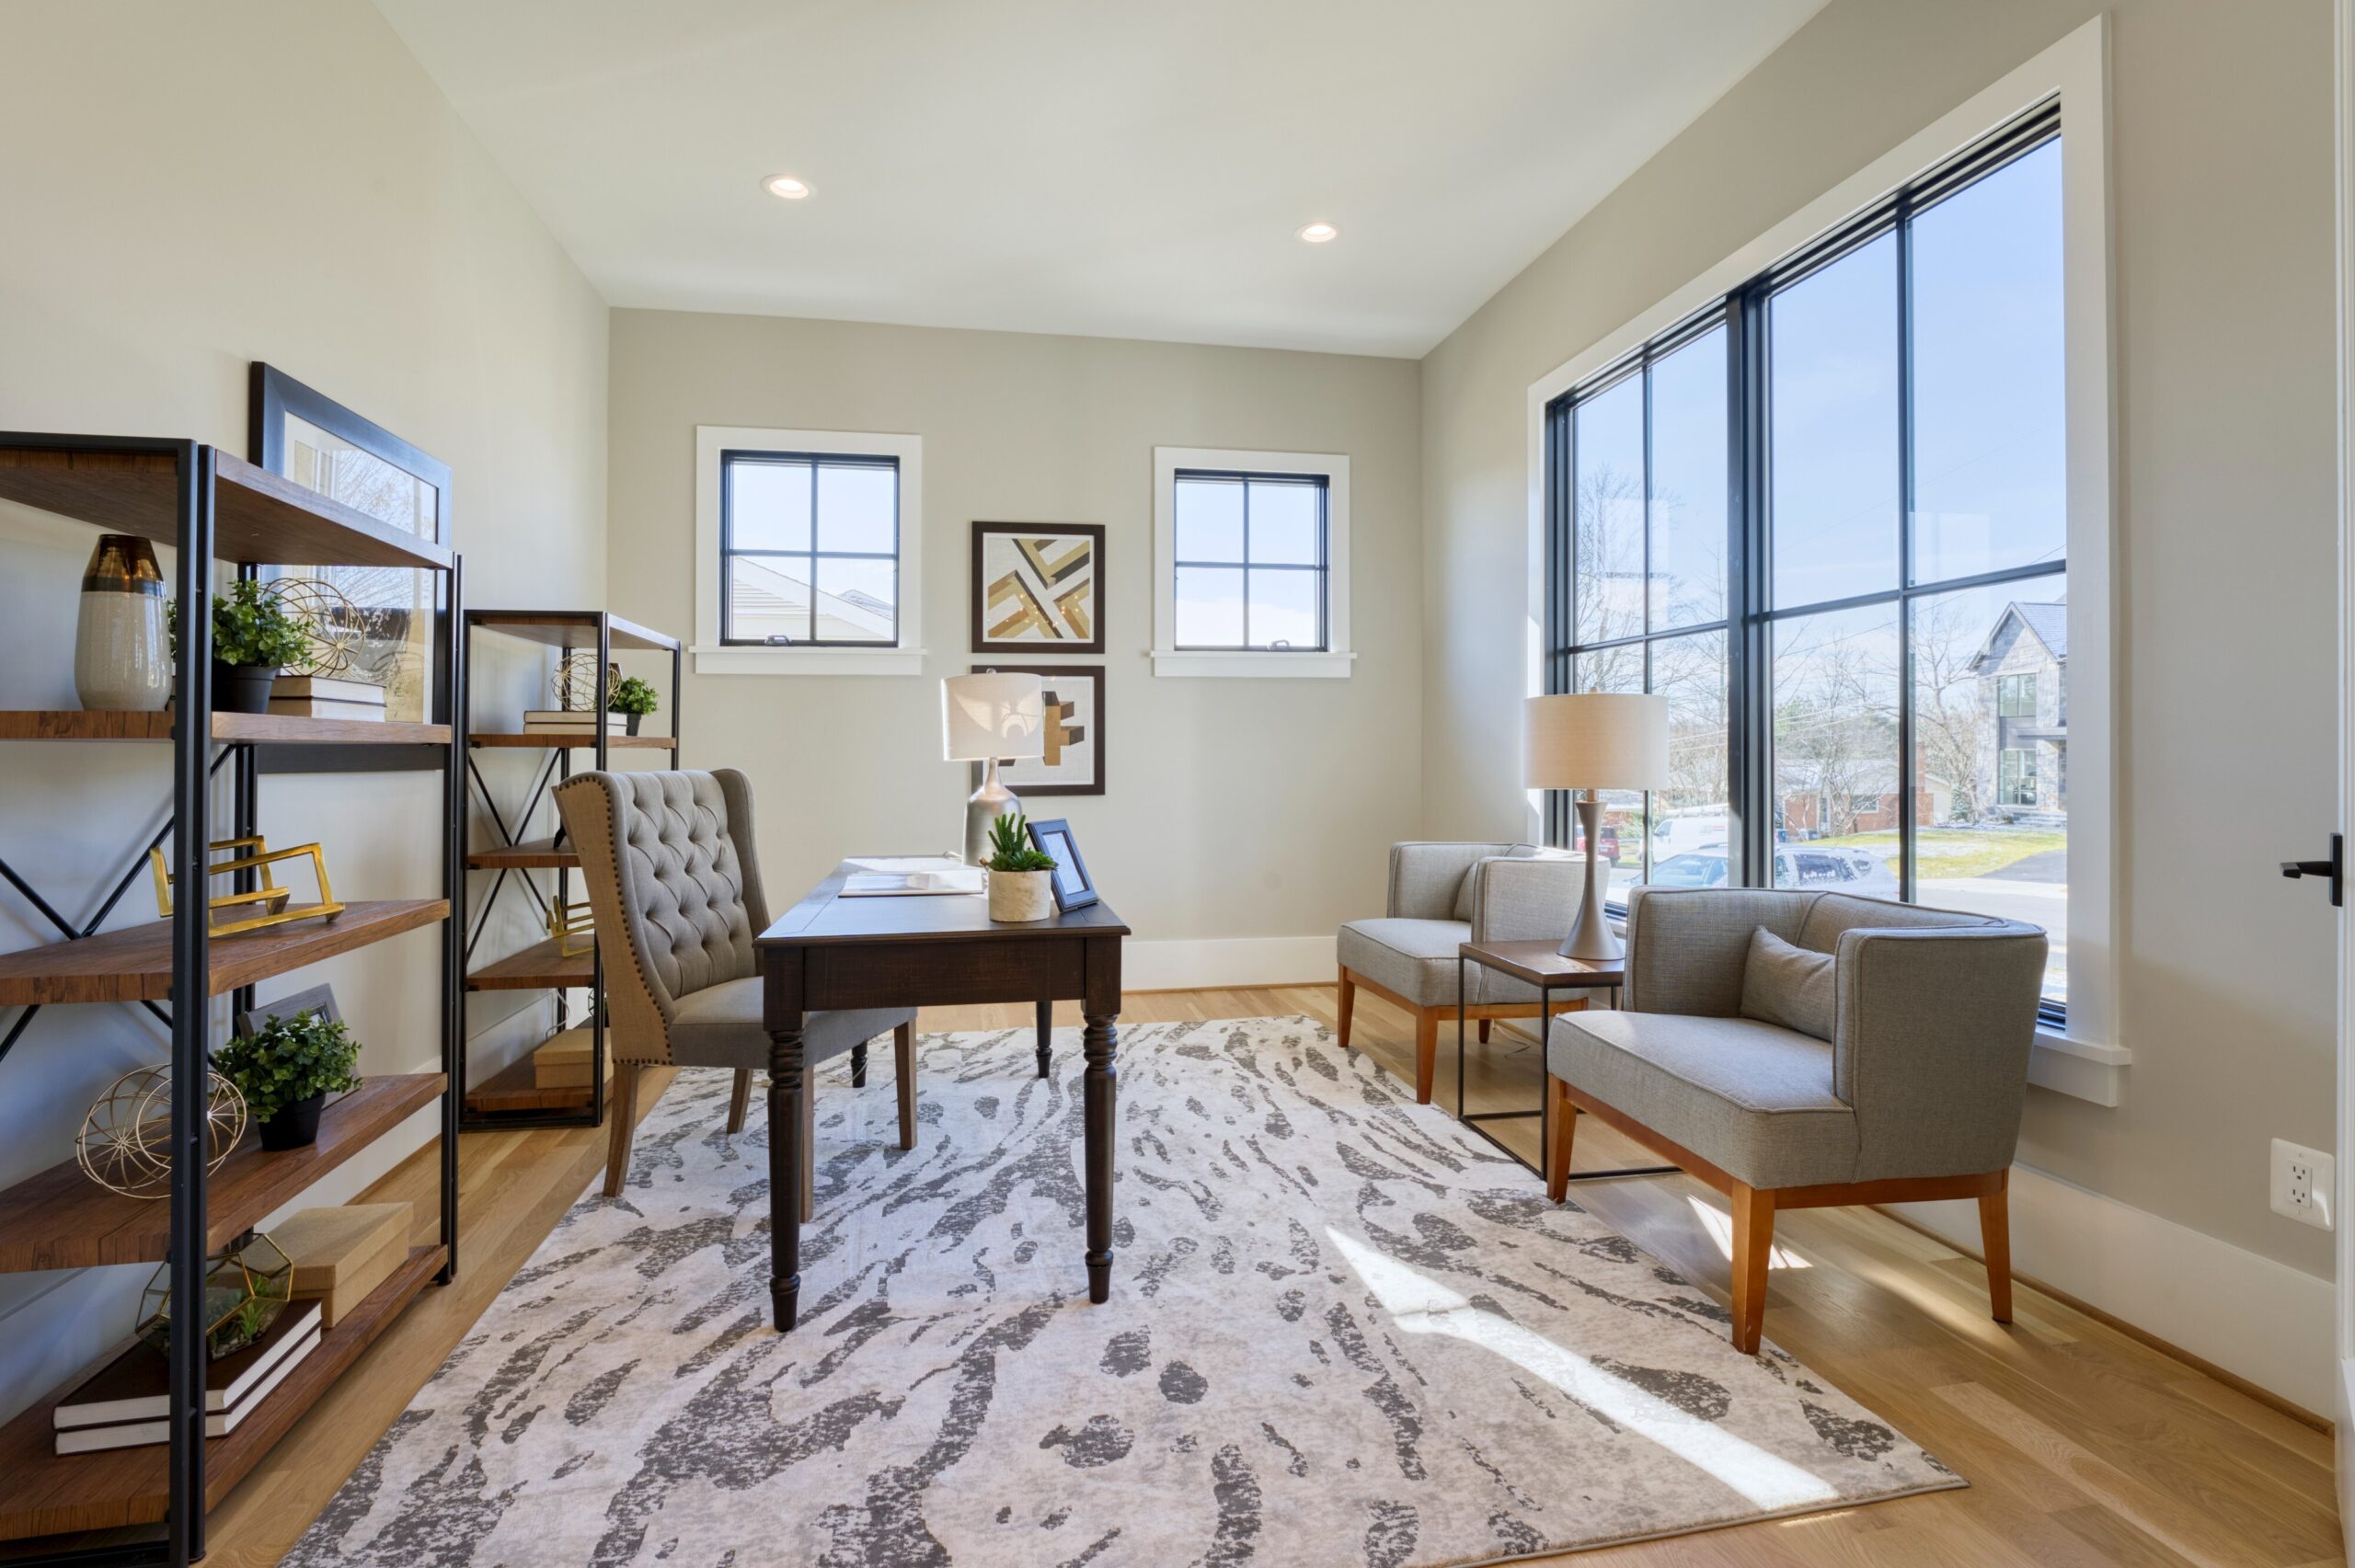 Professional interior photo of 1624 Dempsey St, McLean, VA - showing an office space with hardwood floors and lots of natural light from large windows